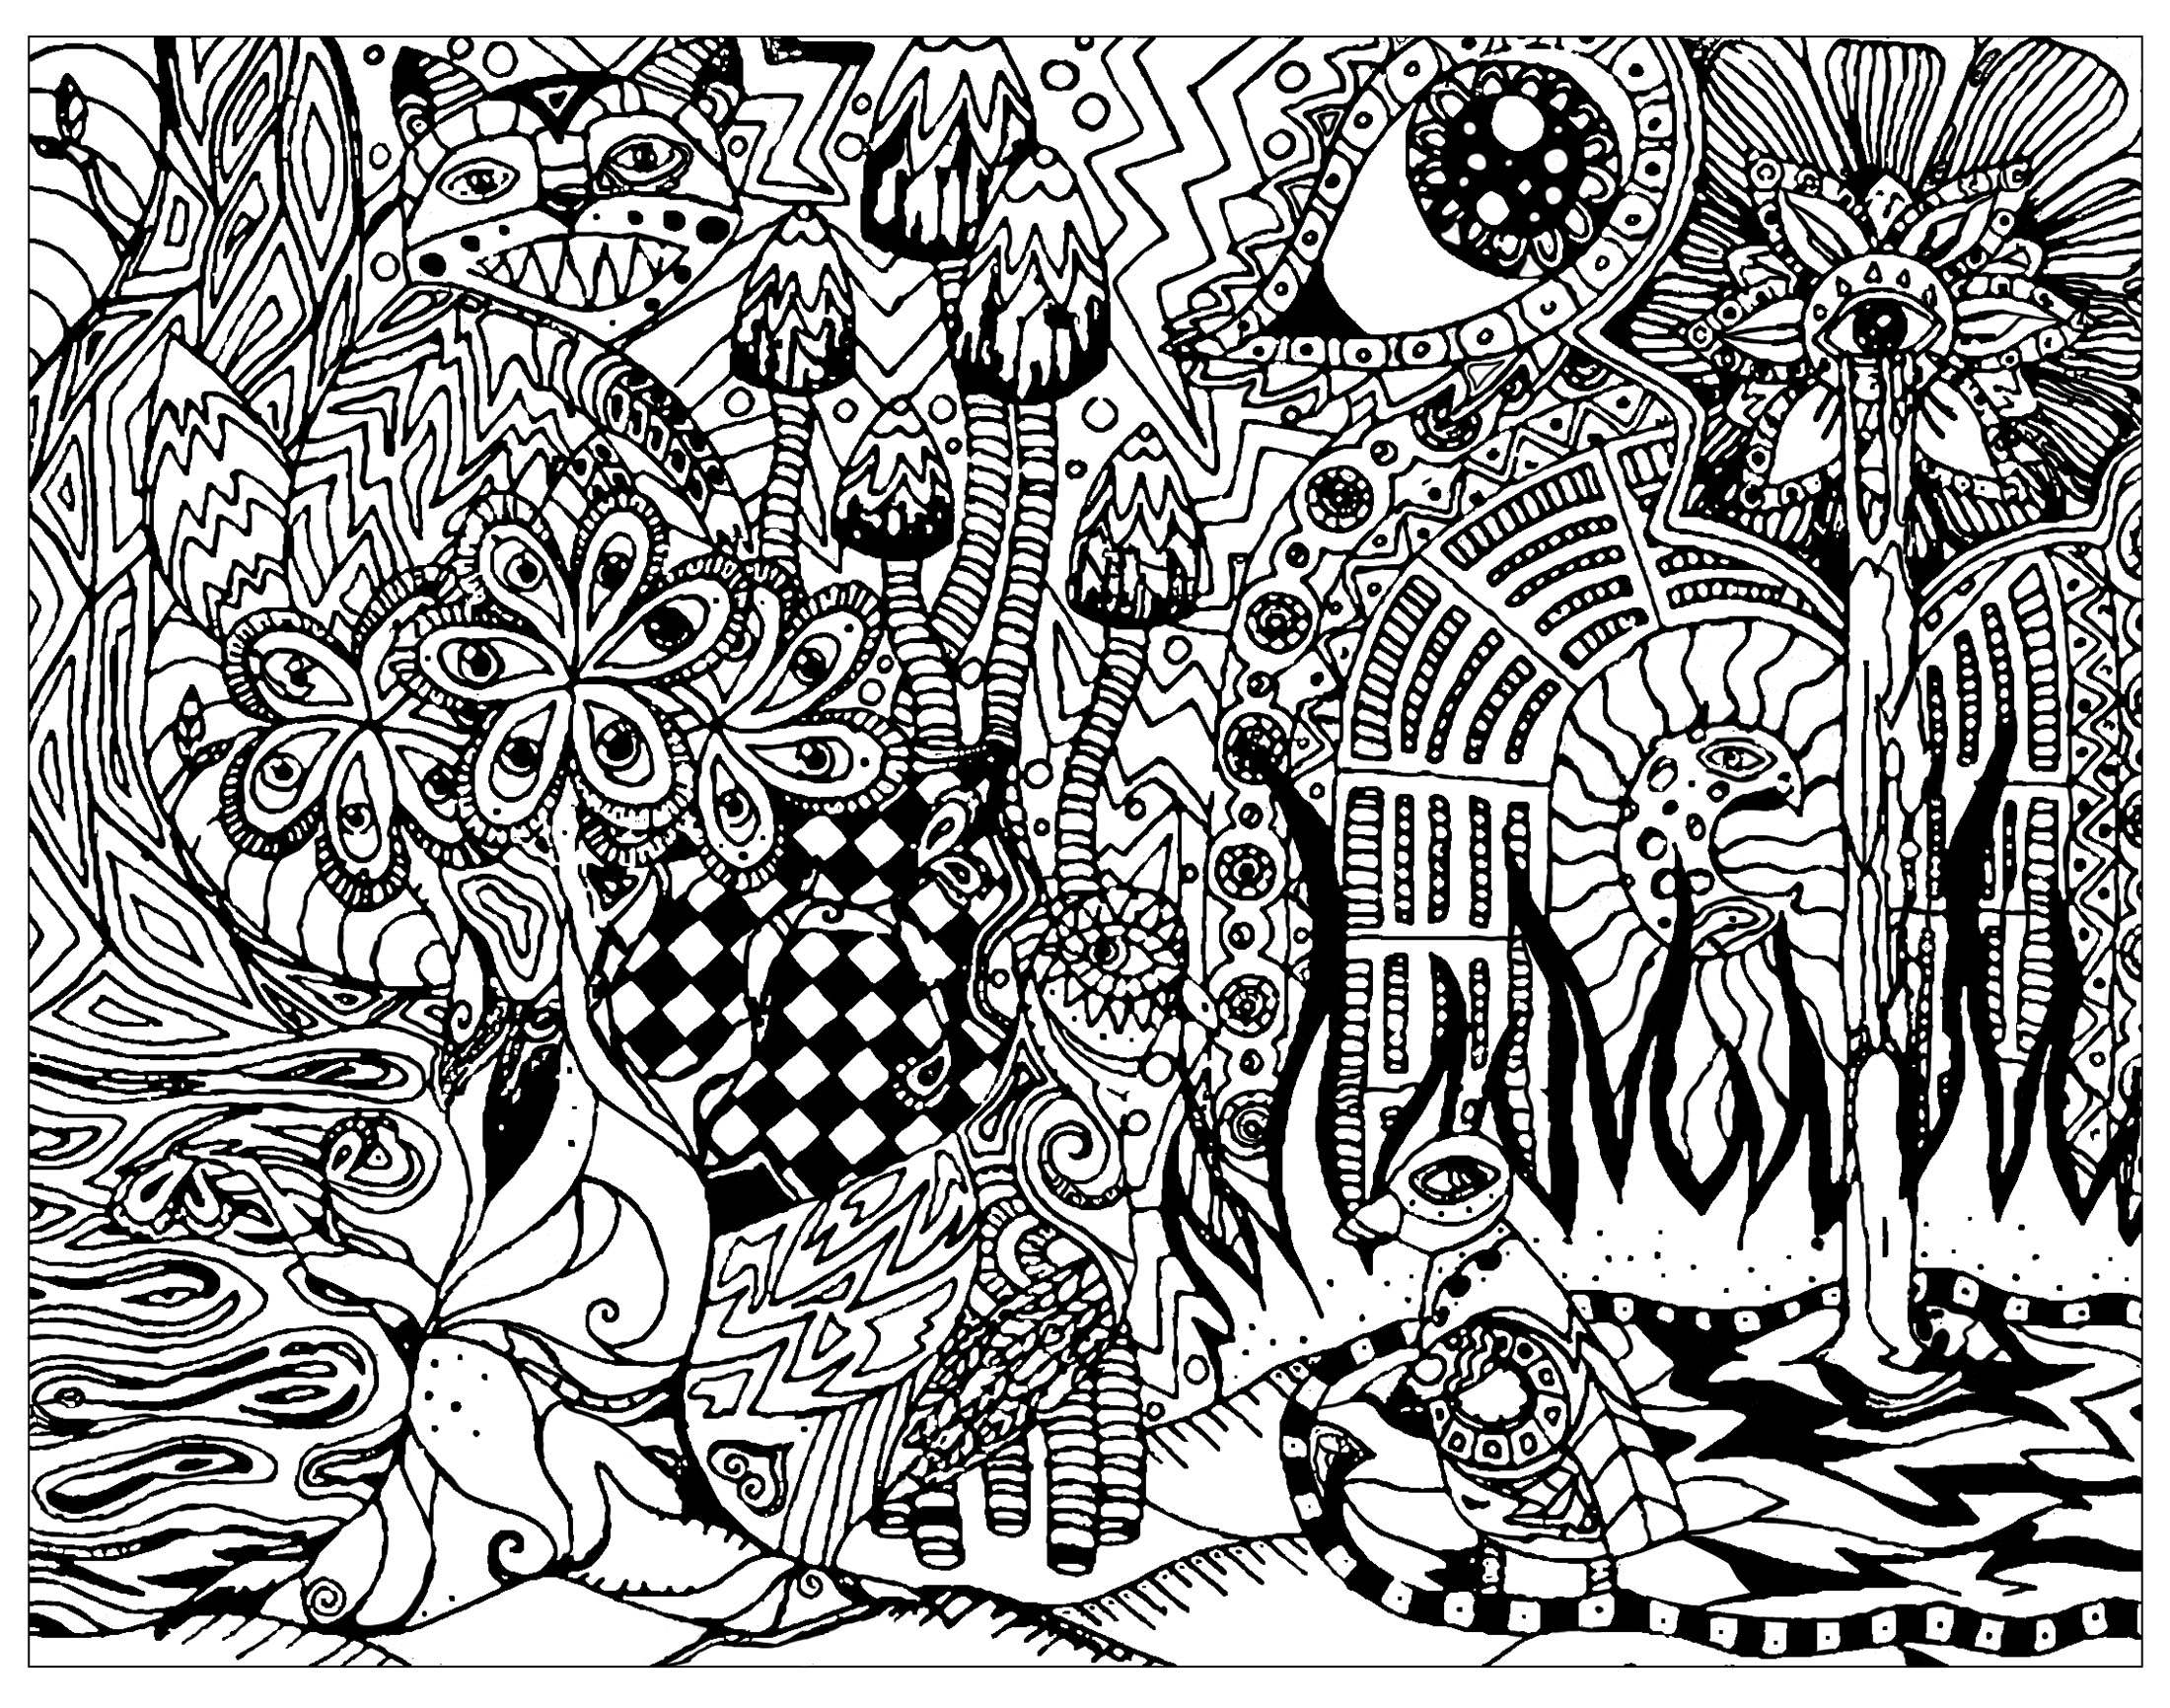 Psychedelic patterns hidden cat - Psychedelic Adult Coloring Pages